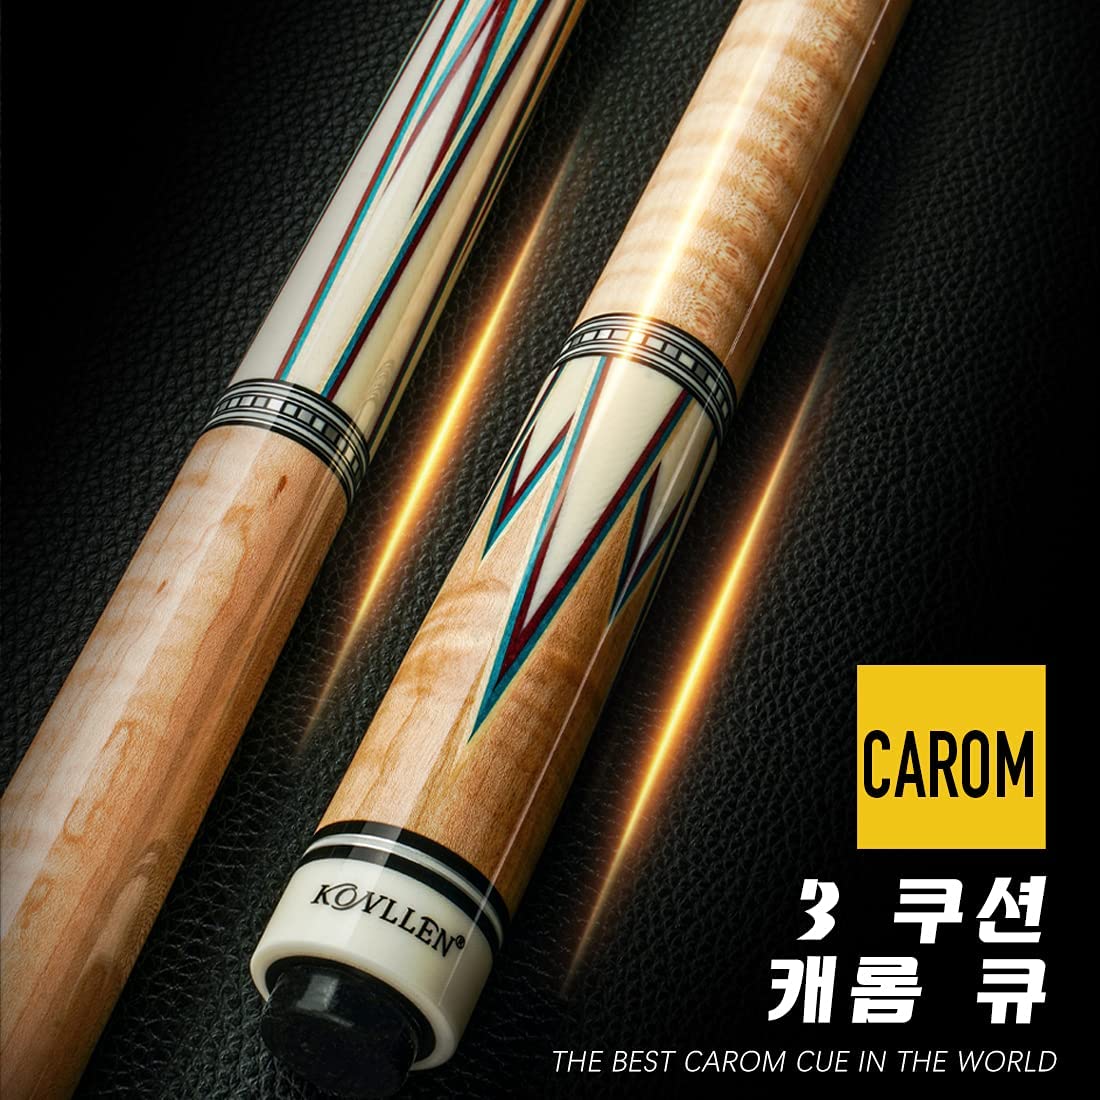 KONLLEN 3 Cushion Carom Cue Real Inlay Low Deflection Stick Technology Billiard Cue (12 Pieces in 1 Shaft,142cm, 12.2mm Tip, Radial Pin Join